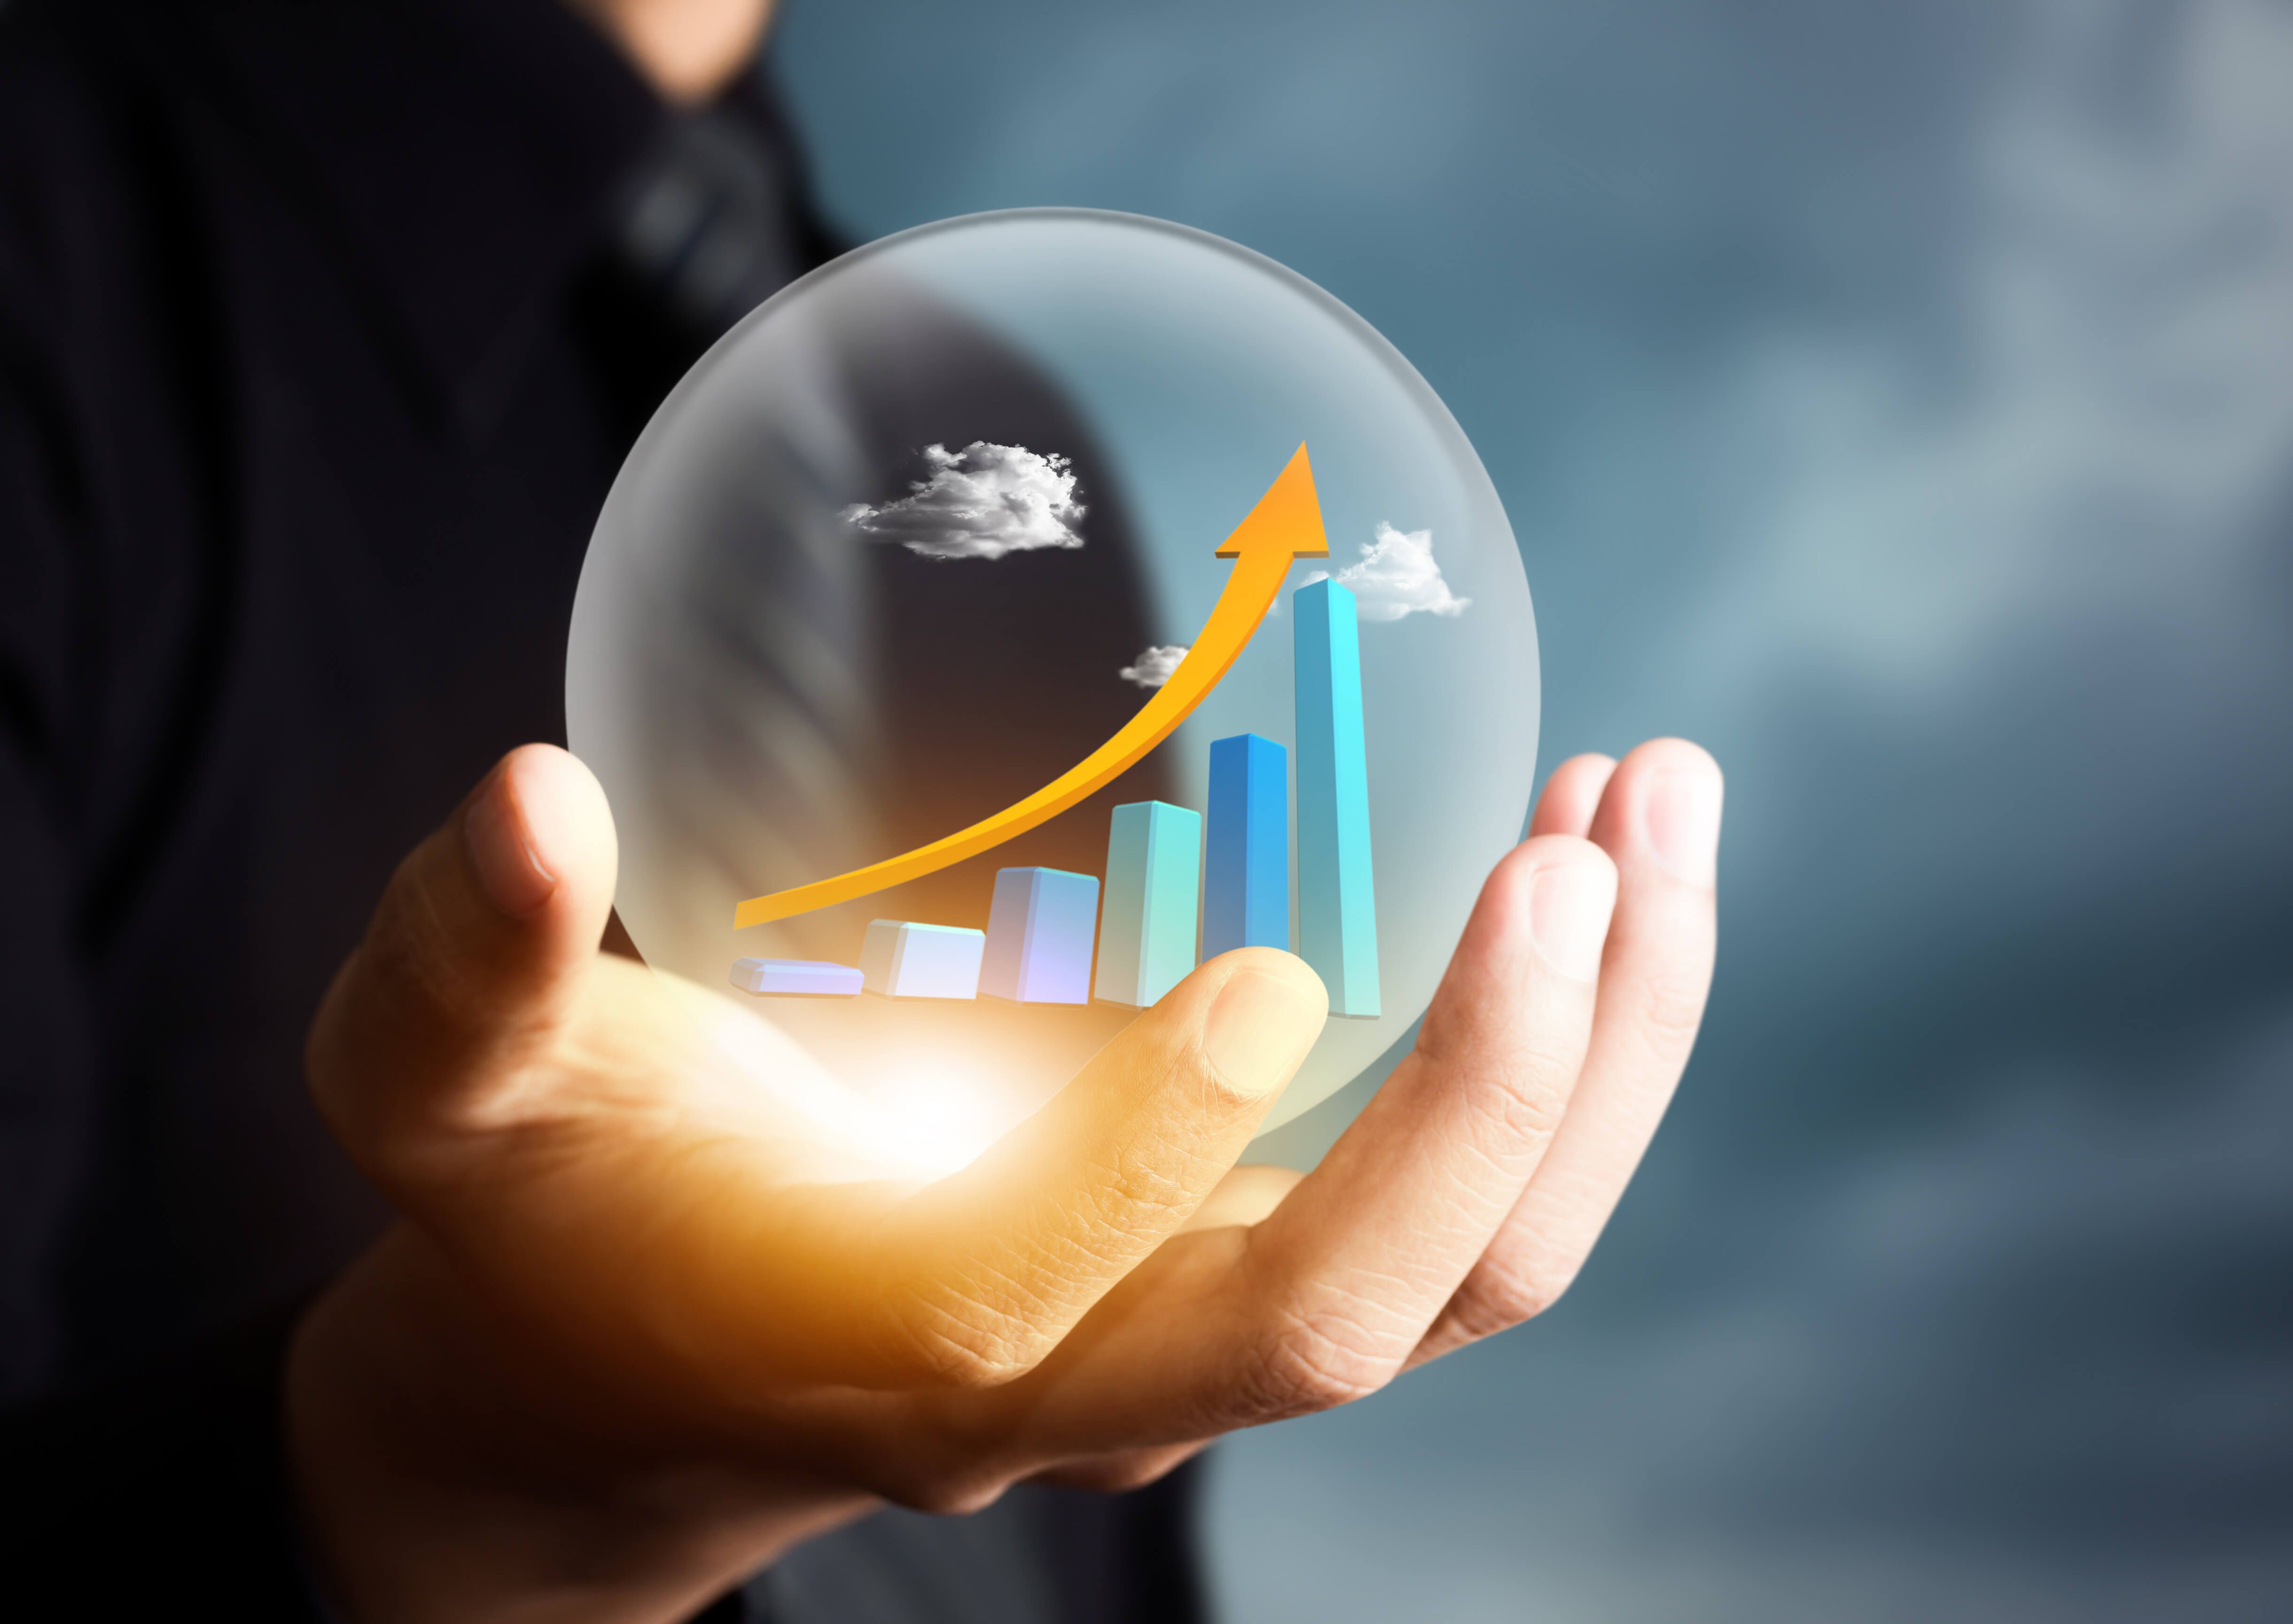 Five predictions for business, marketing and human resource leaders in 2022